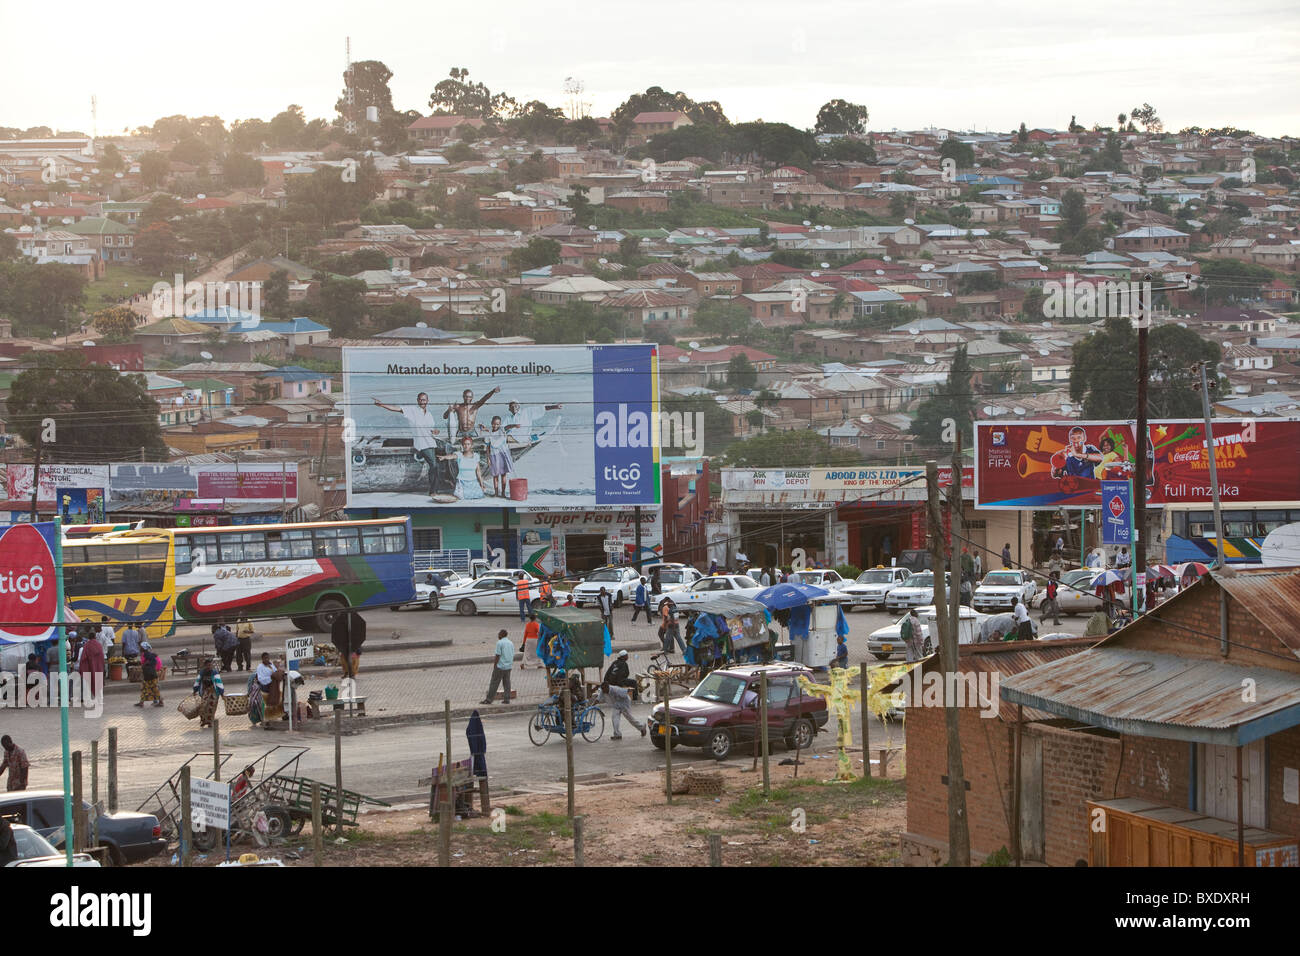 Scene from the central bus stand in Iringa town, Tanzania, East Africa. Stock Photo